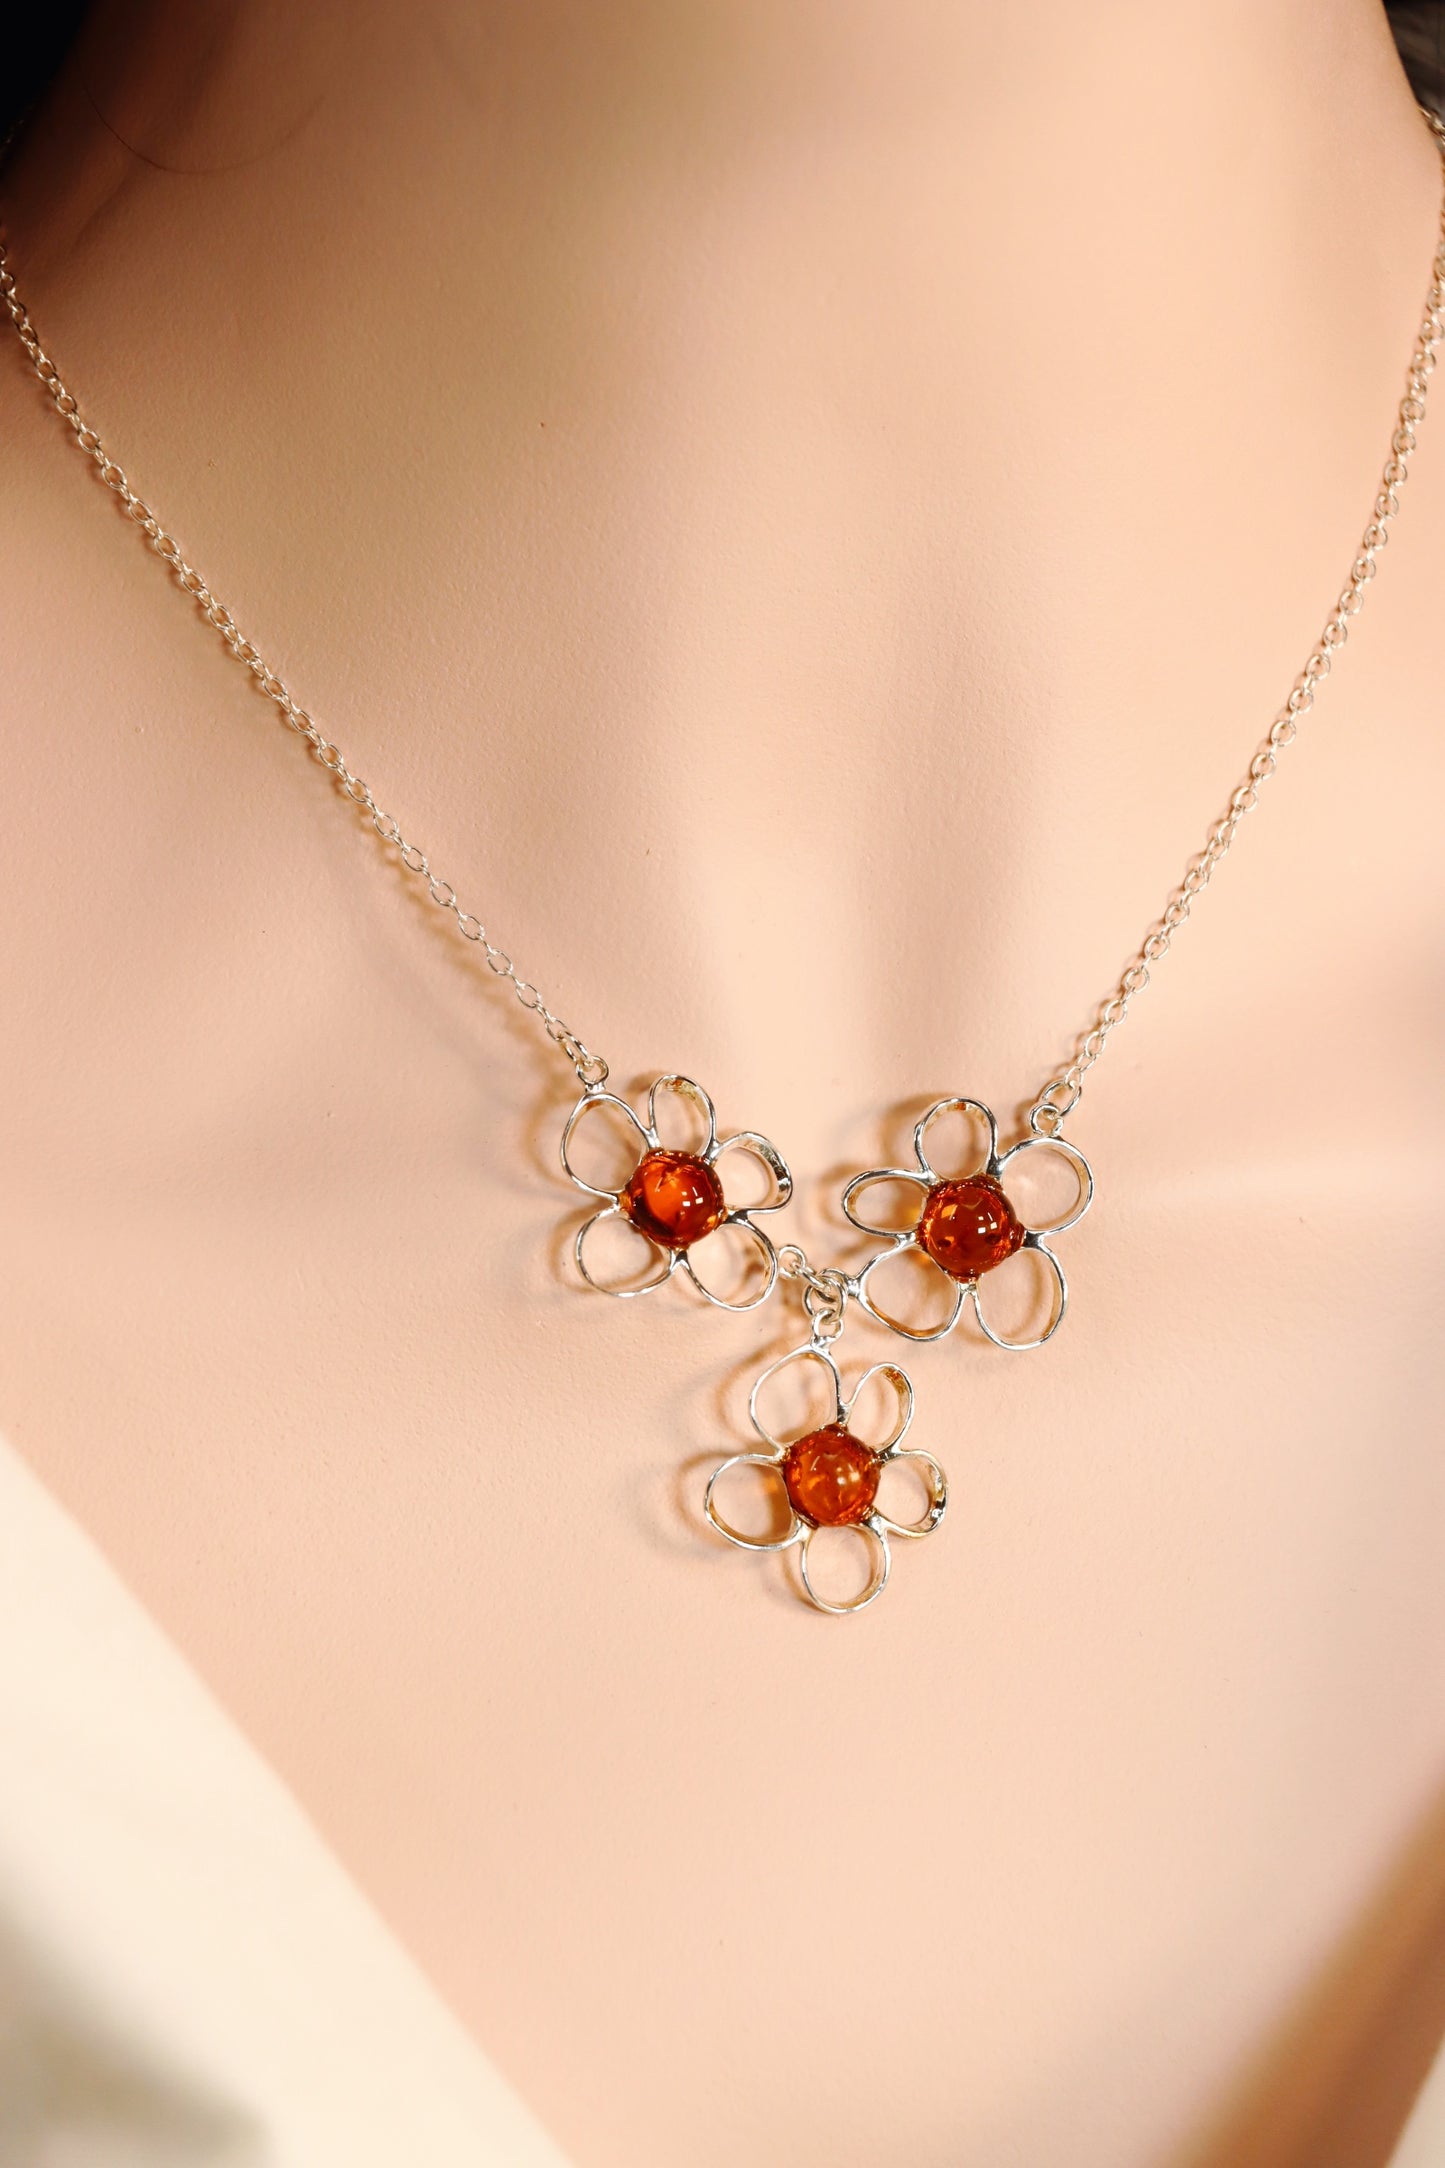 Natural Baltic Cognac Amber Flower Child Necklace in 925 Sterling Silver